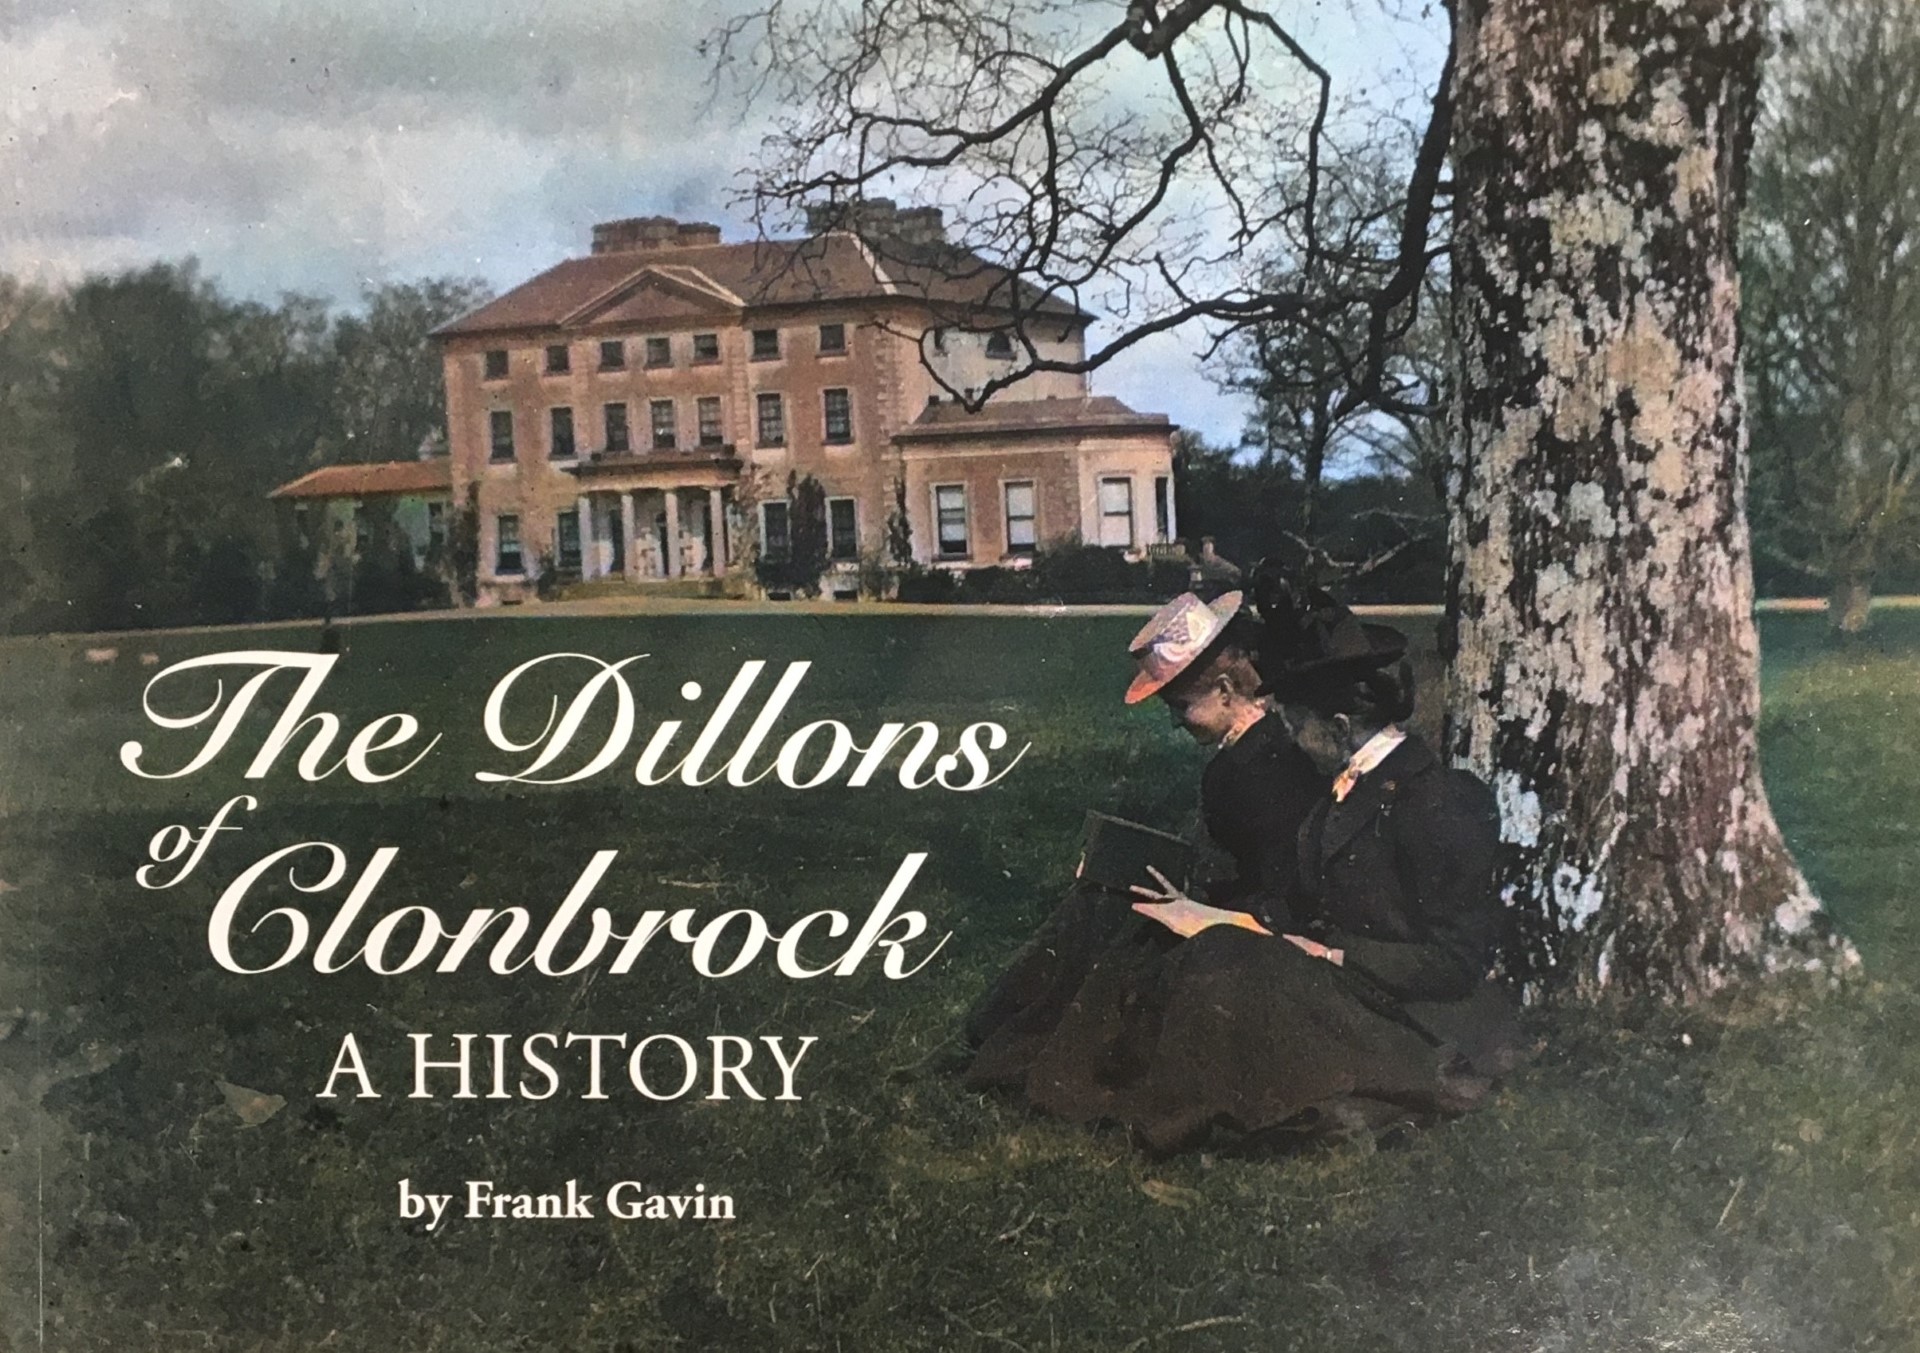 The Dillons of Clonbrock : A History by Frank Gavin